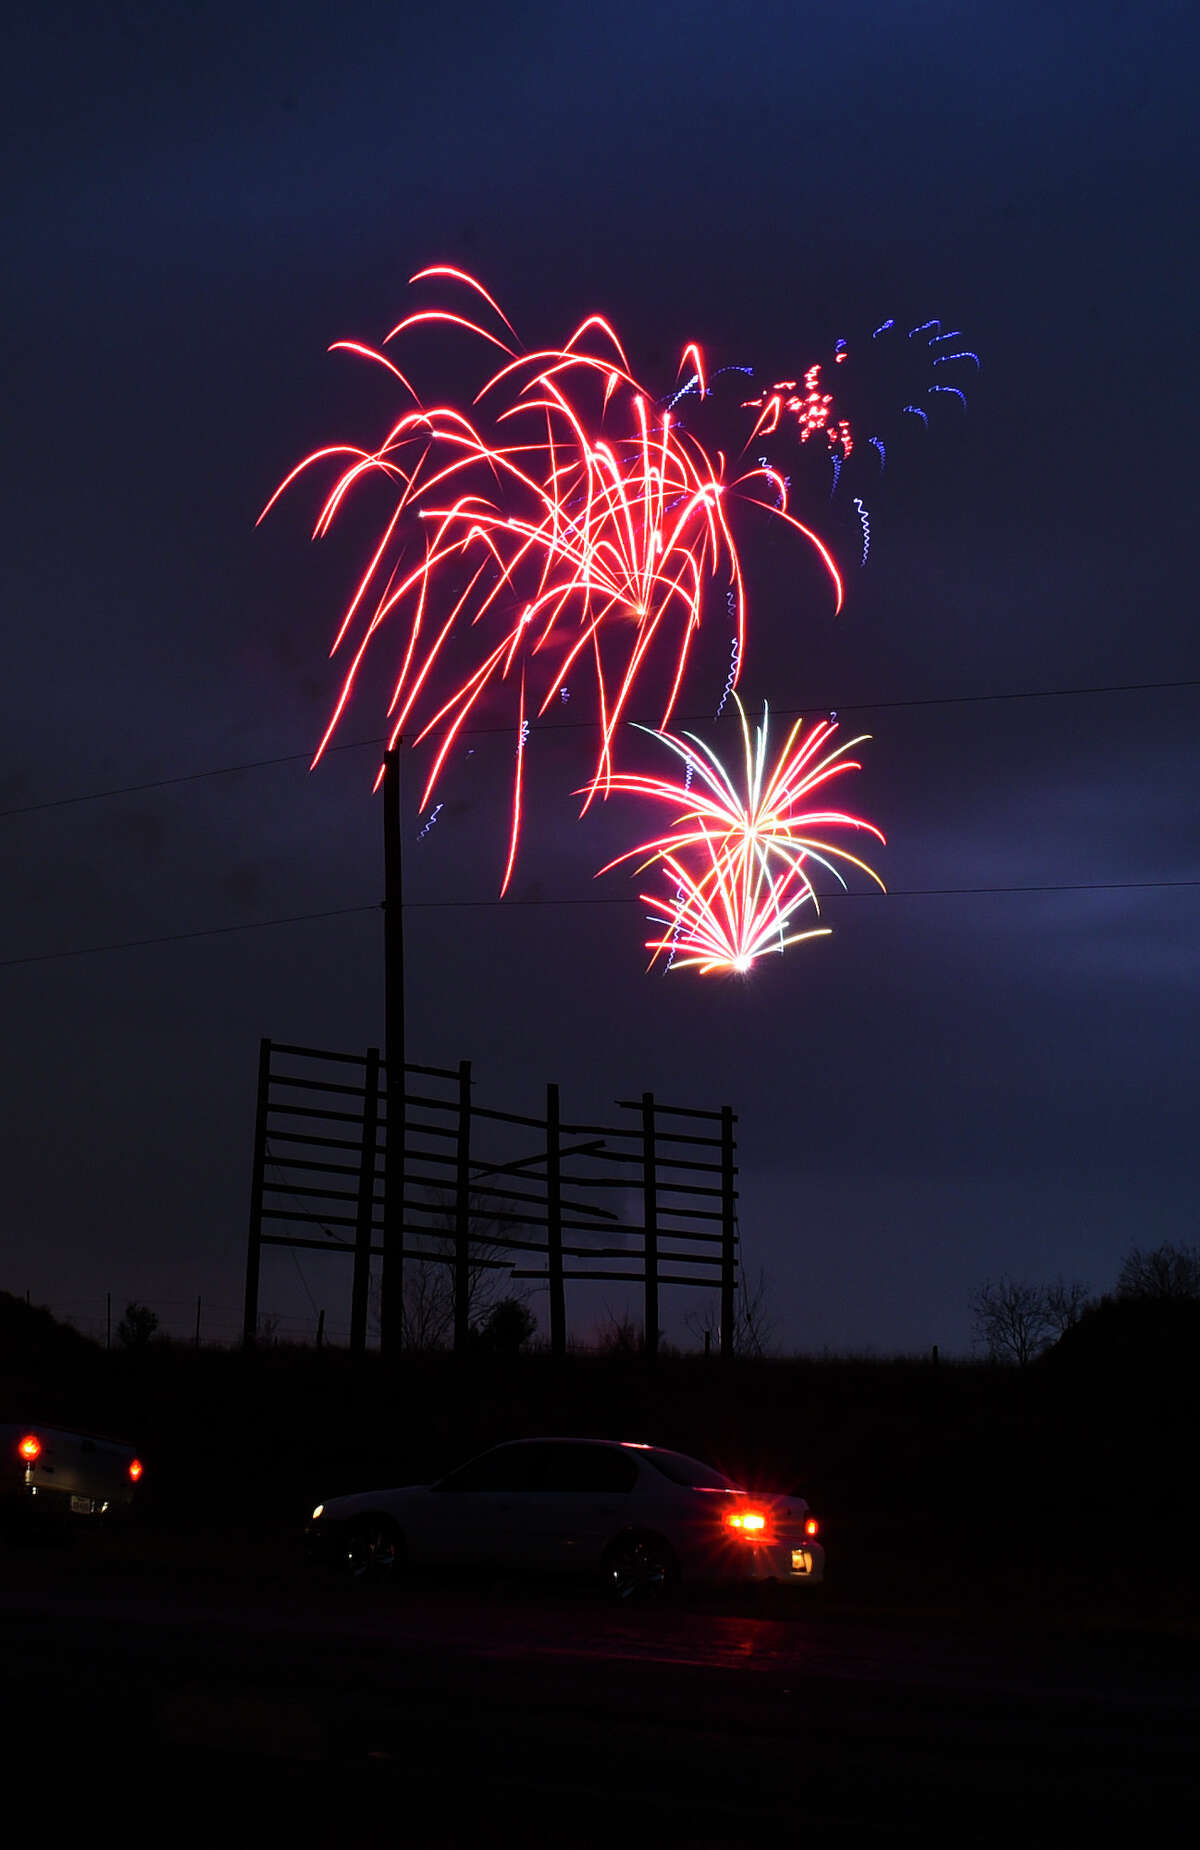 The WBCA H-E-B Fireworks Extravaganza lights up the sky along with lightning from a storm rolling in on Sunday, February 18, 2017 as this year's WBCA events come to a conclusion.